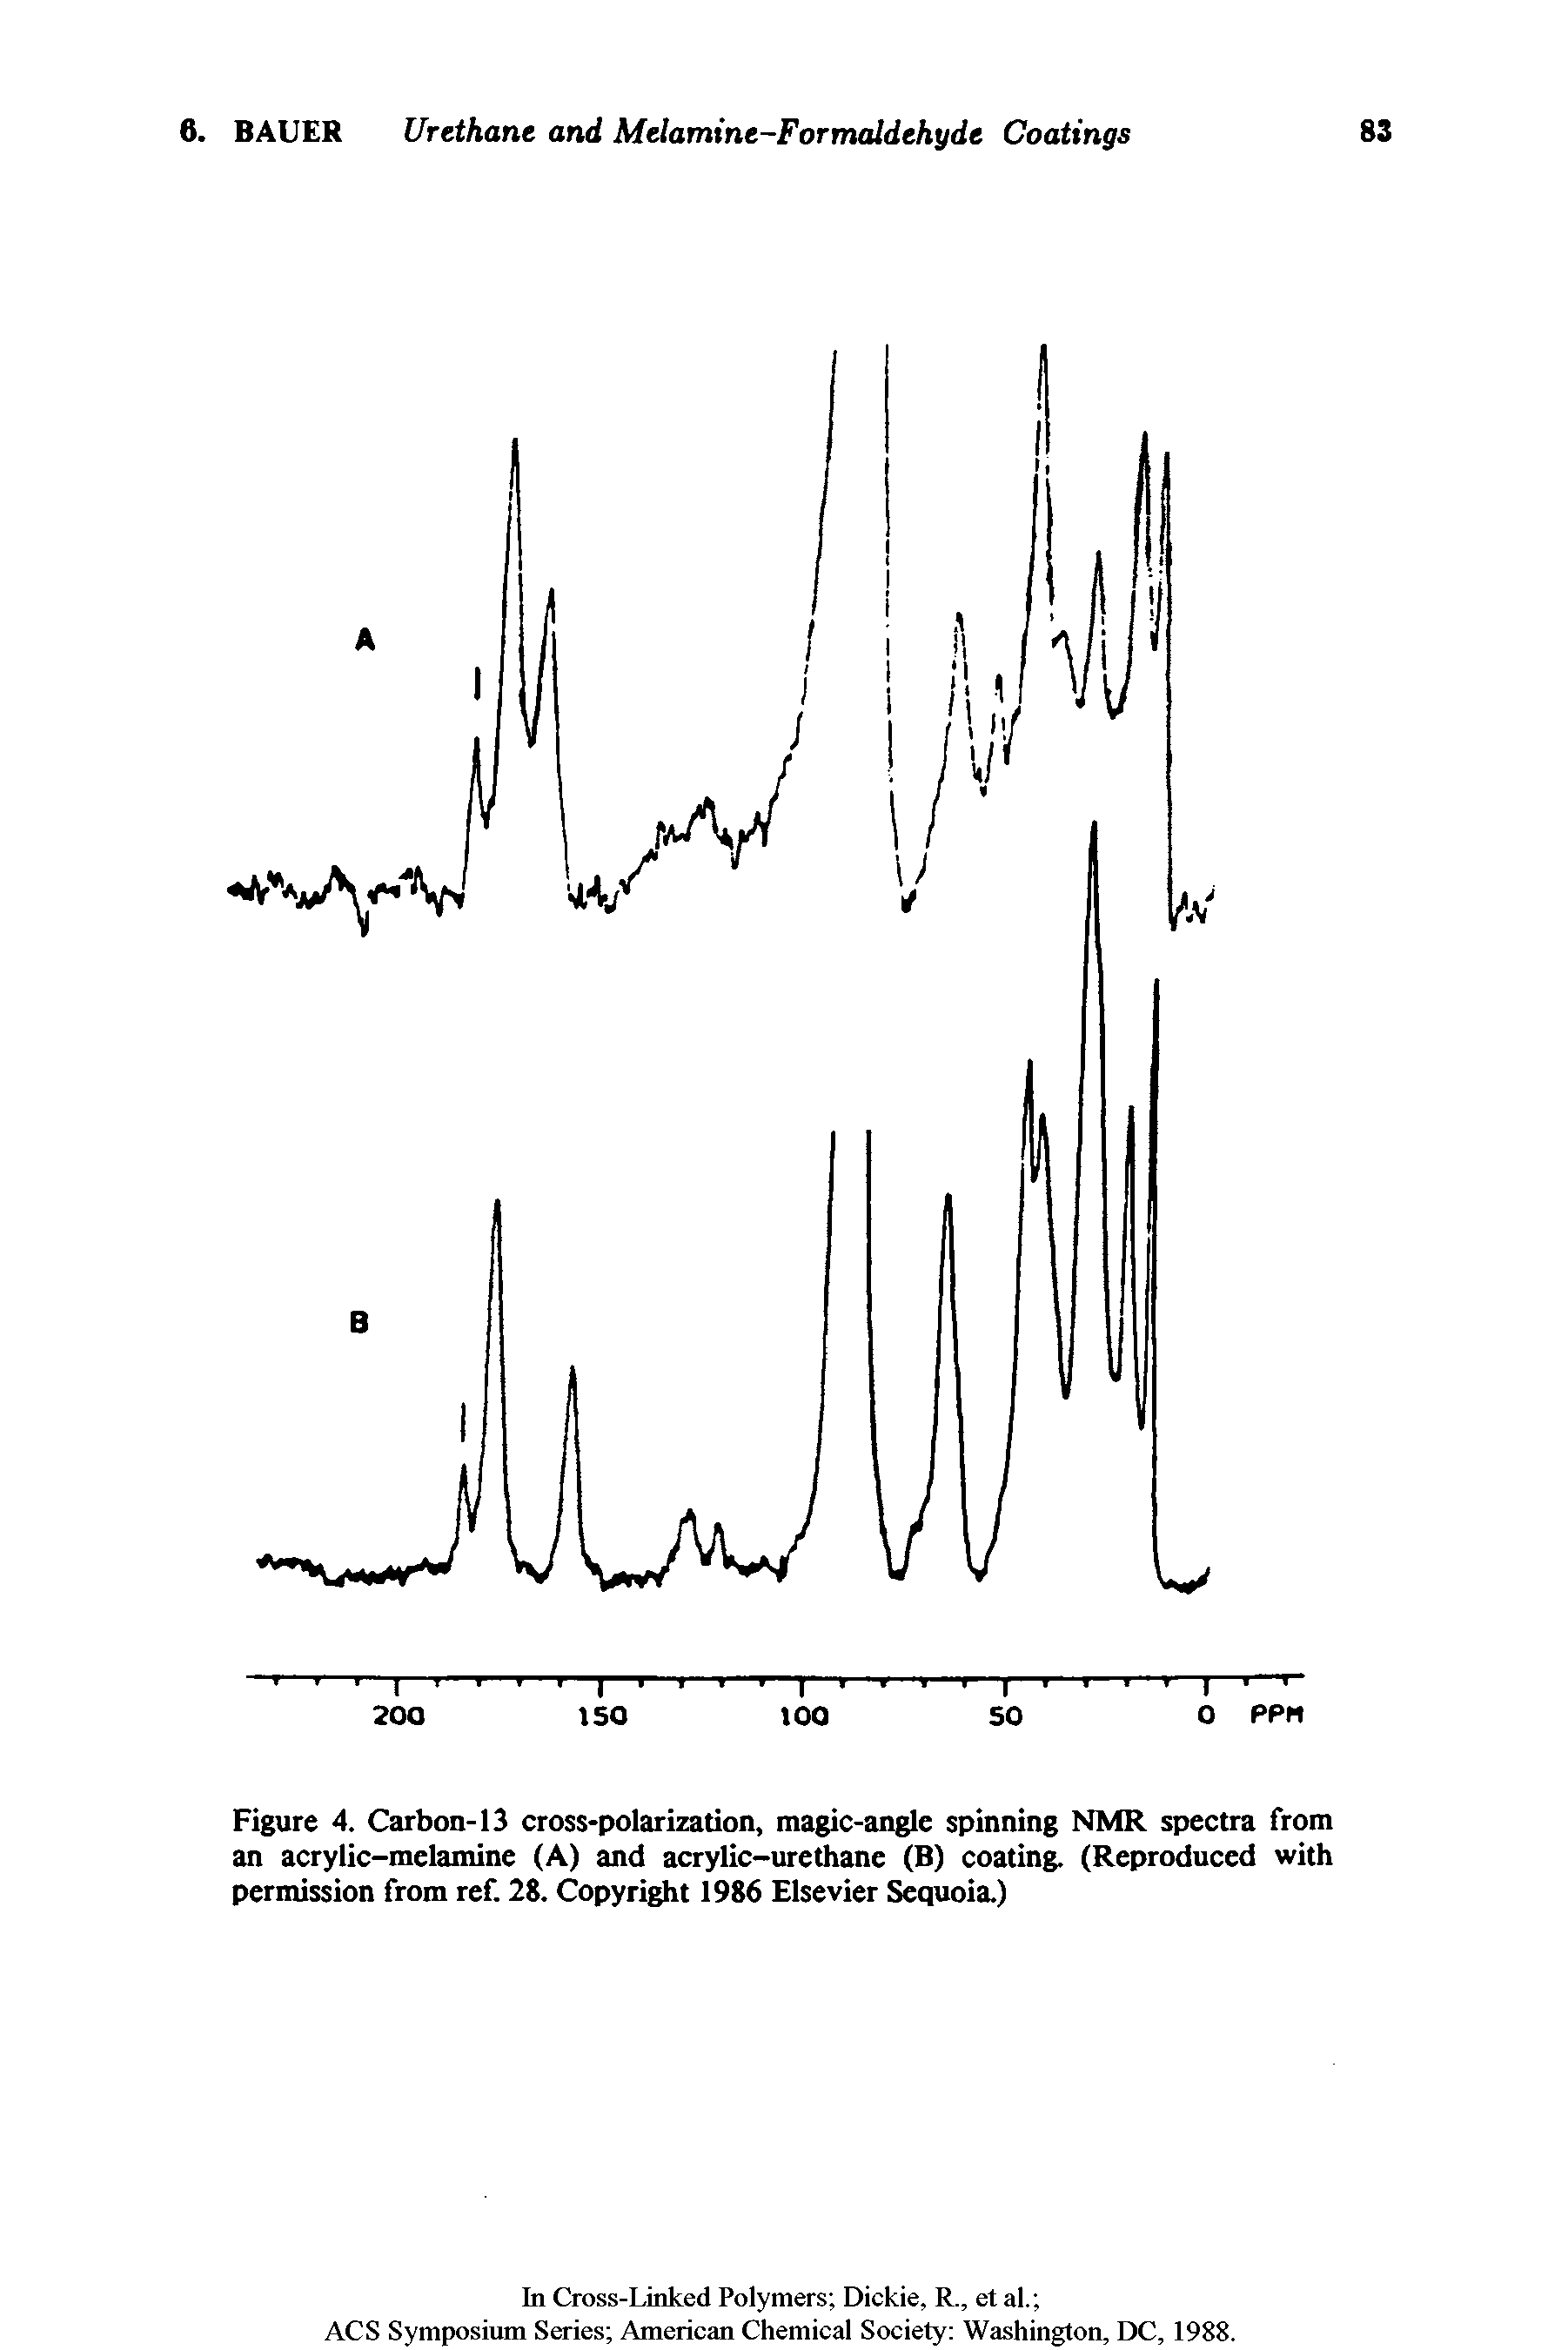 Figure 4. Carbon-13 cross-polarization, magic-angle spinning NMR spectra from an acrylic-melamine (A) and acrylic-urethane (B) coating. (Reproduced with permission from ref. 28. Copyright 1986 Elsevier Sequoia.)...